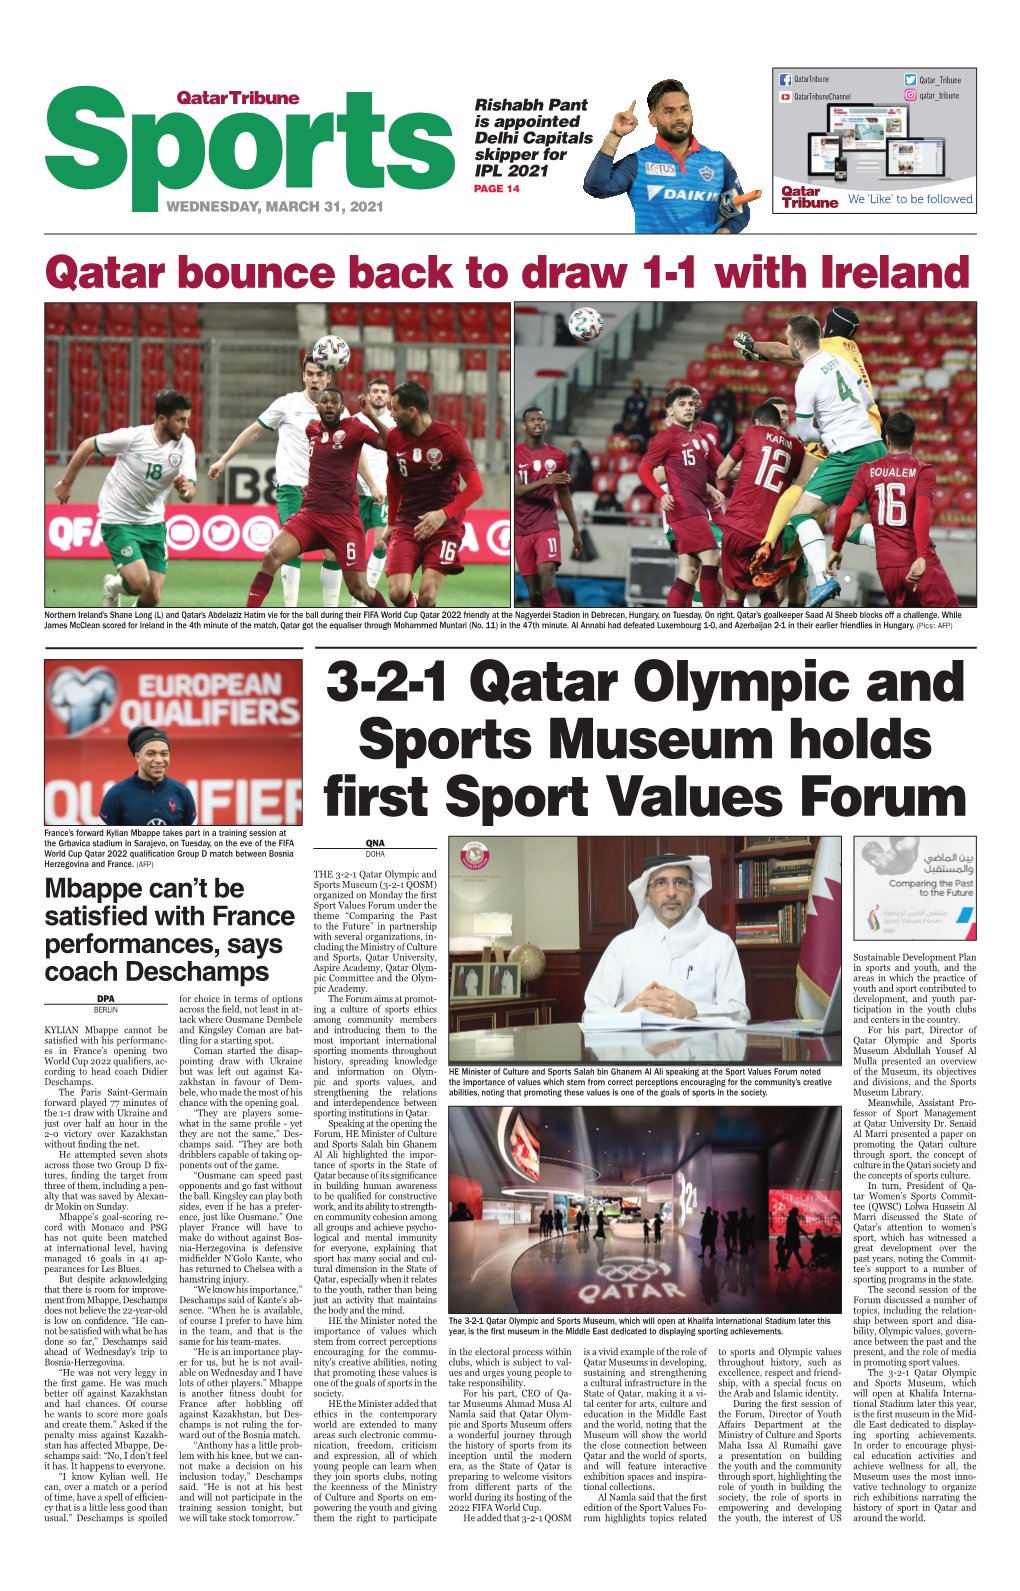 3-2-1 Qatar Olympic and Sports Museum Holds First Sport Values Forum